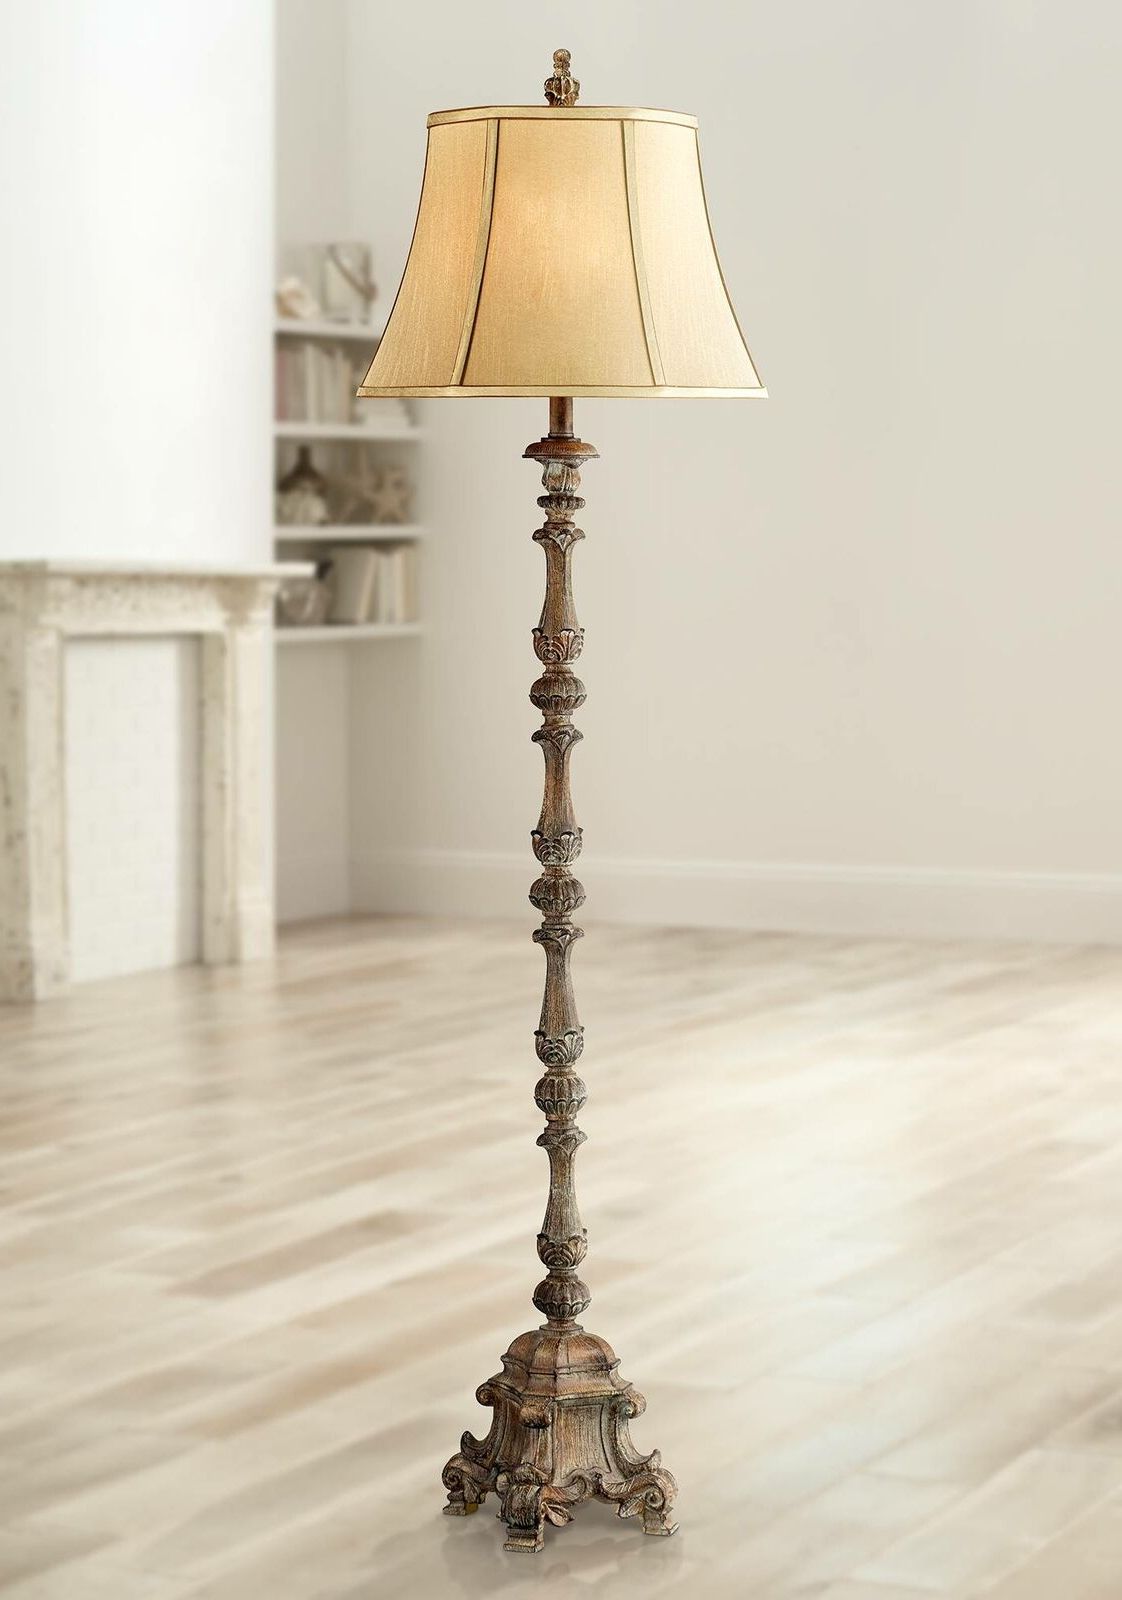 Rustic Standing Lamps In Current Rustic Floor Lamp French Faux Wood Antique Beige Bell Shade For Living Room (View 12 of 15)